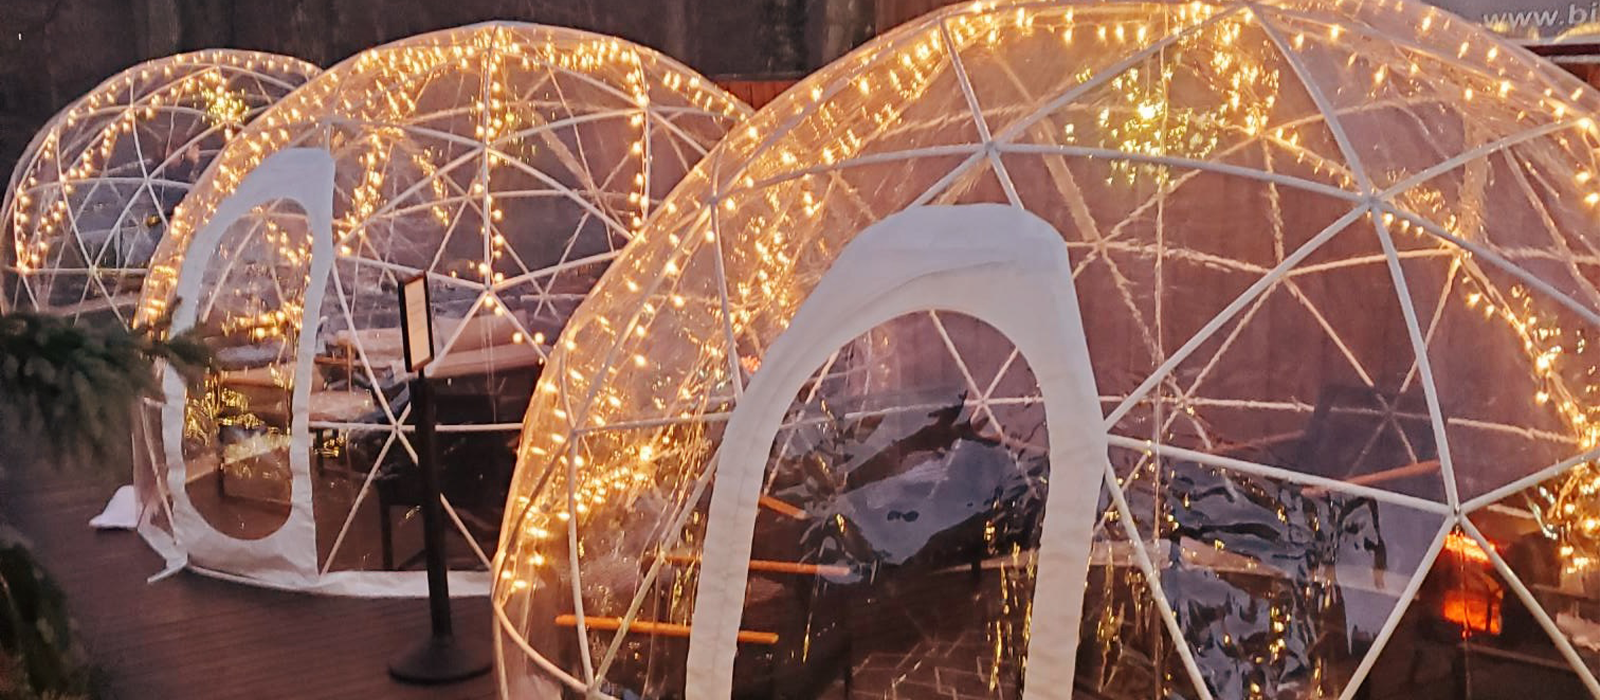 Cozy, private igloos to rent at Oliver Winery. Perfect for small groups on a cozy winter day.